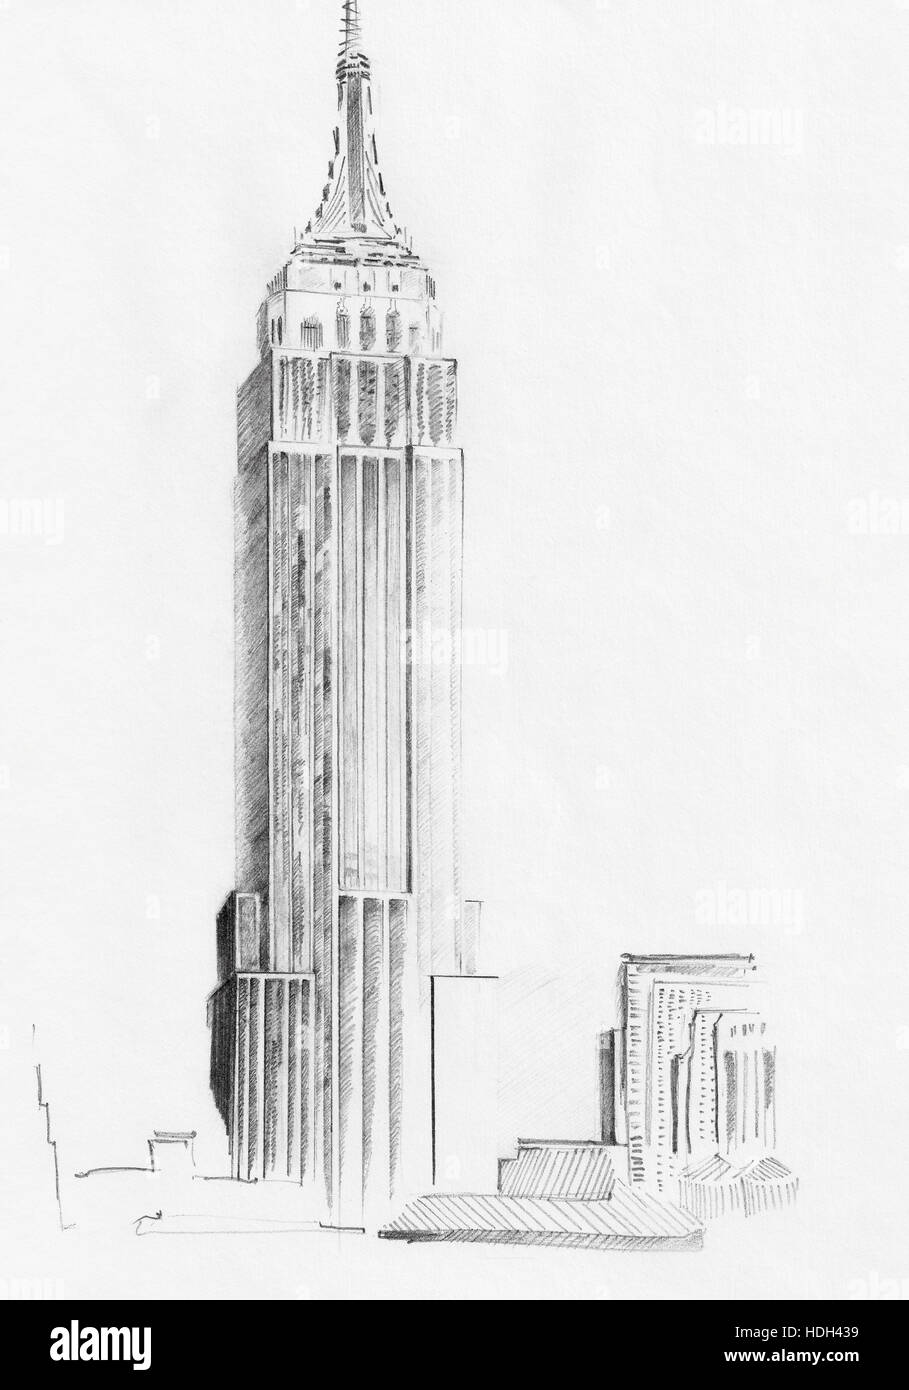 Sketch of Empire State Building Stock Photo